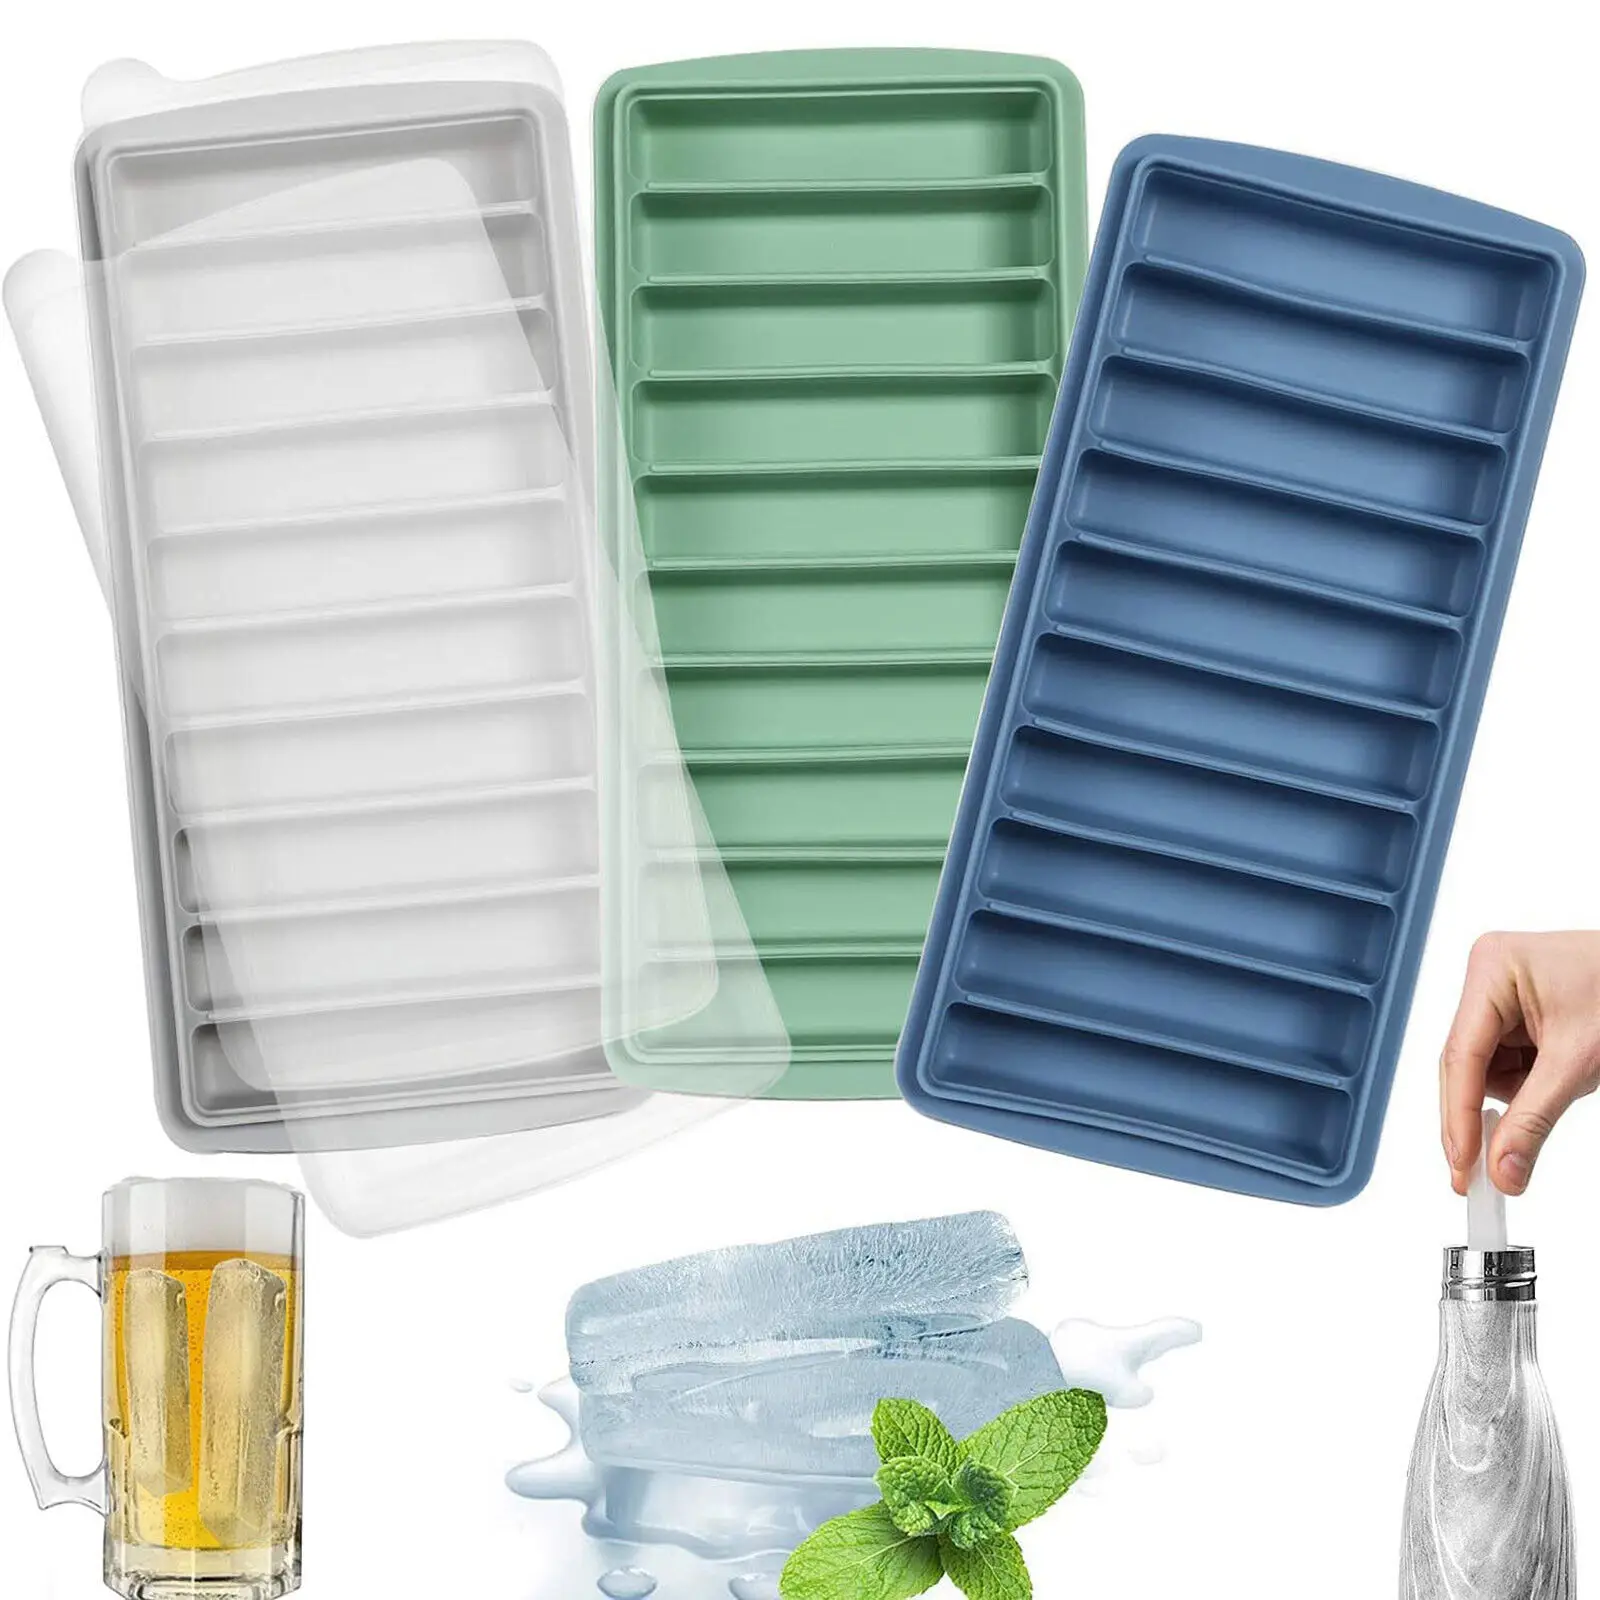 

10 Grids Ice Cube Trays Reusable Silicone Ice Cube Mold Long Slim Sticks Fits Sports Water Bottle DIY Ice Cream Popsicle Maker